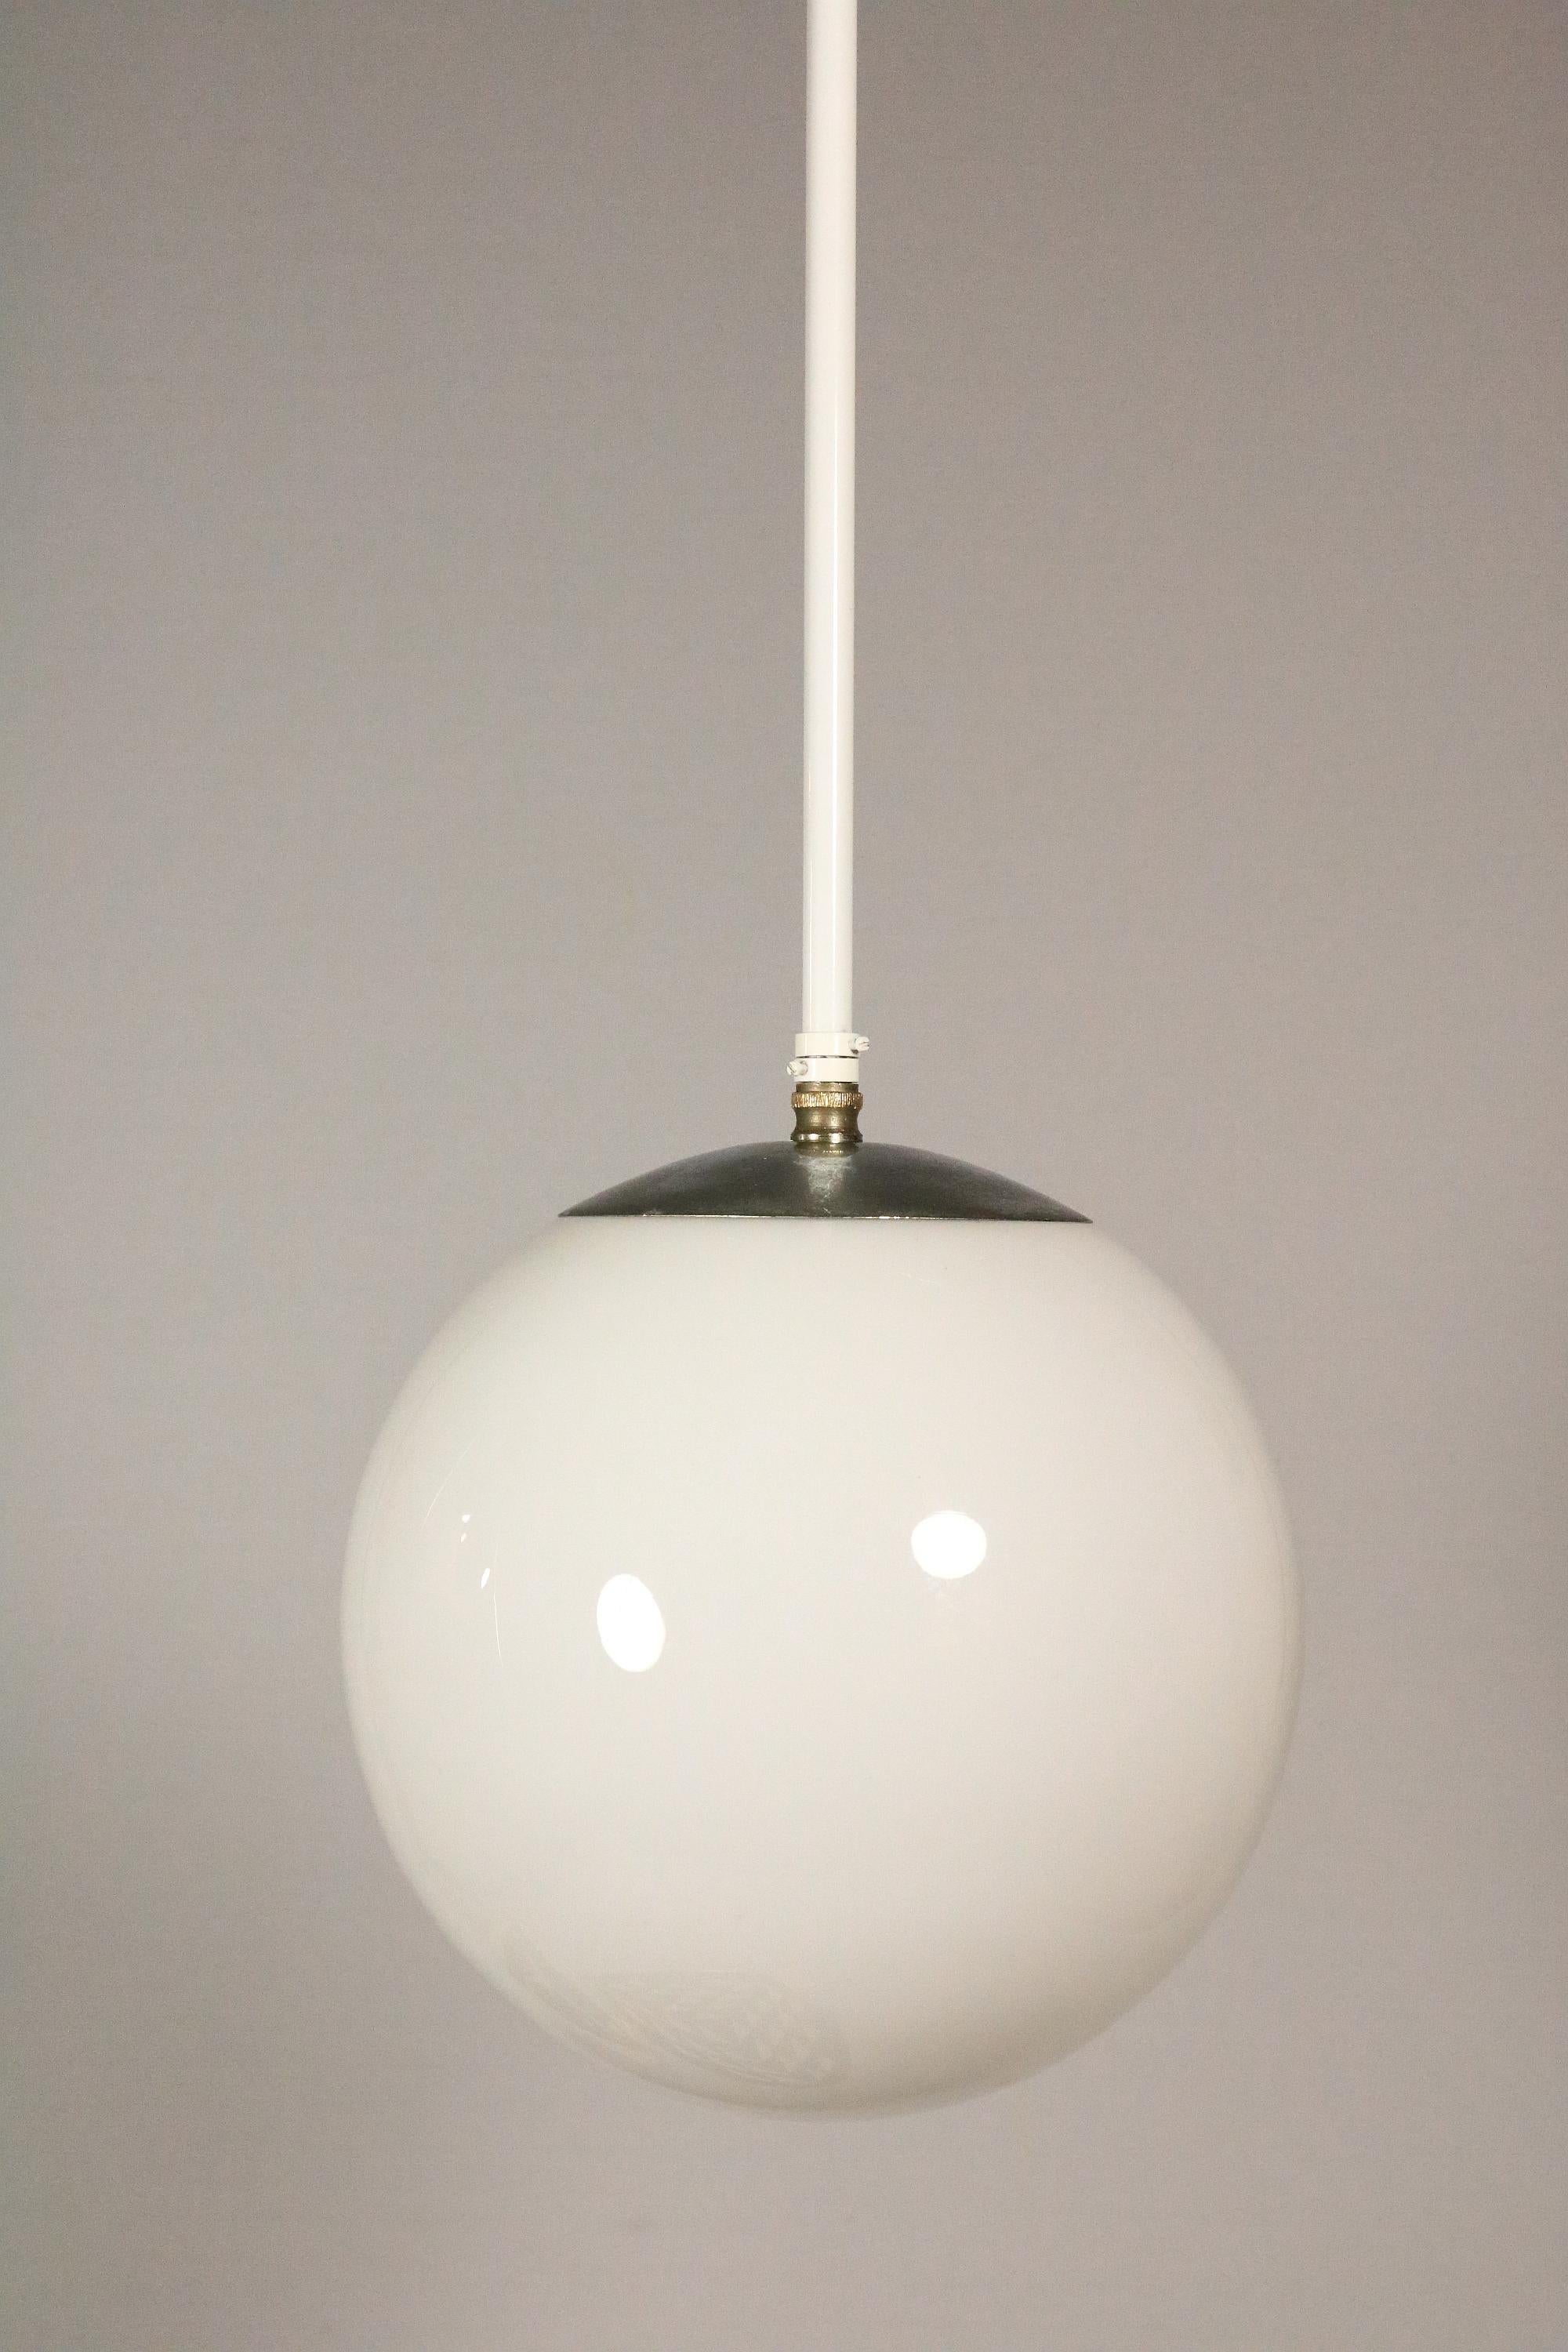 Classic Light from the 1940s 1950s
Danish ball lamp made of opaline glass.
 
Well preserved with signs of use on the metal cover.
New white painted pendant rod and new wiring.
 
Height: 75 cm / 29.5 inch
Diameter: ca. 25 / 10 inch

Tables are not